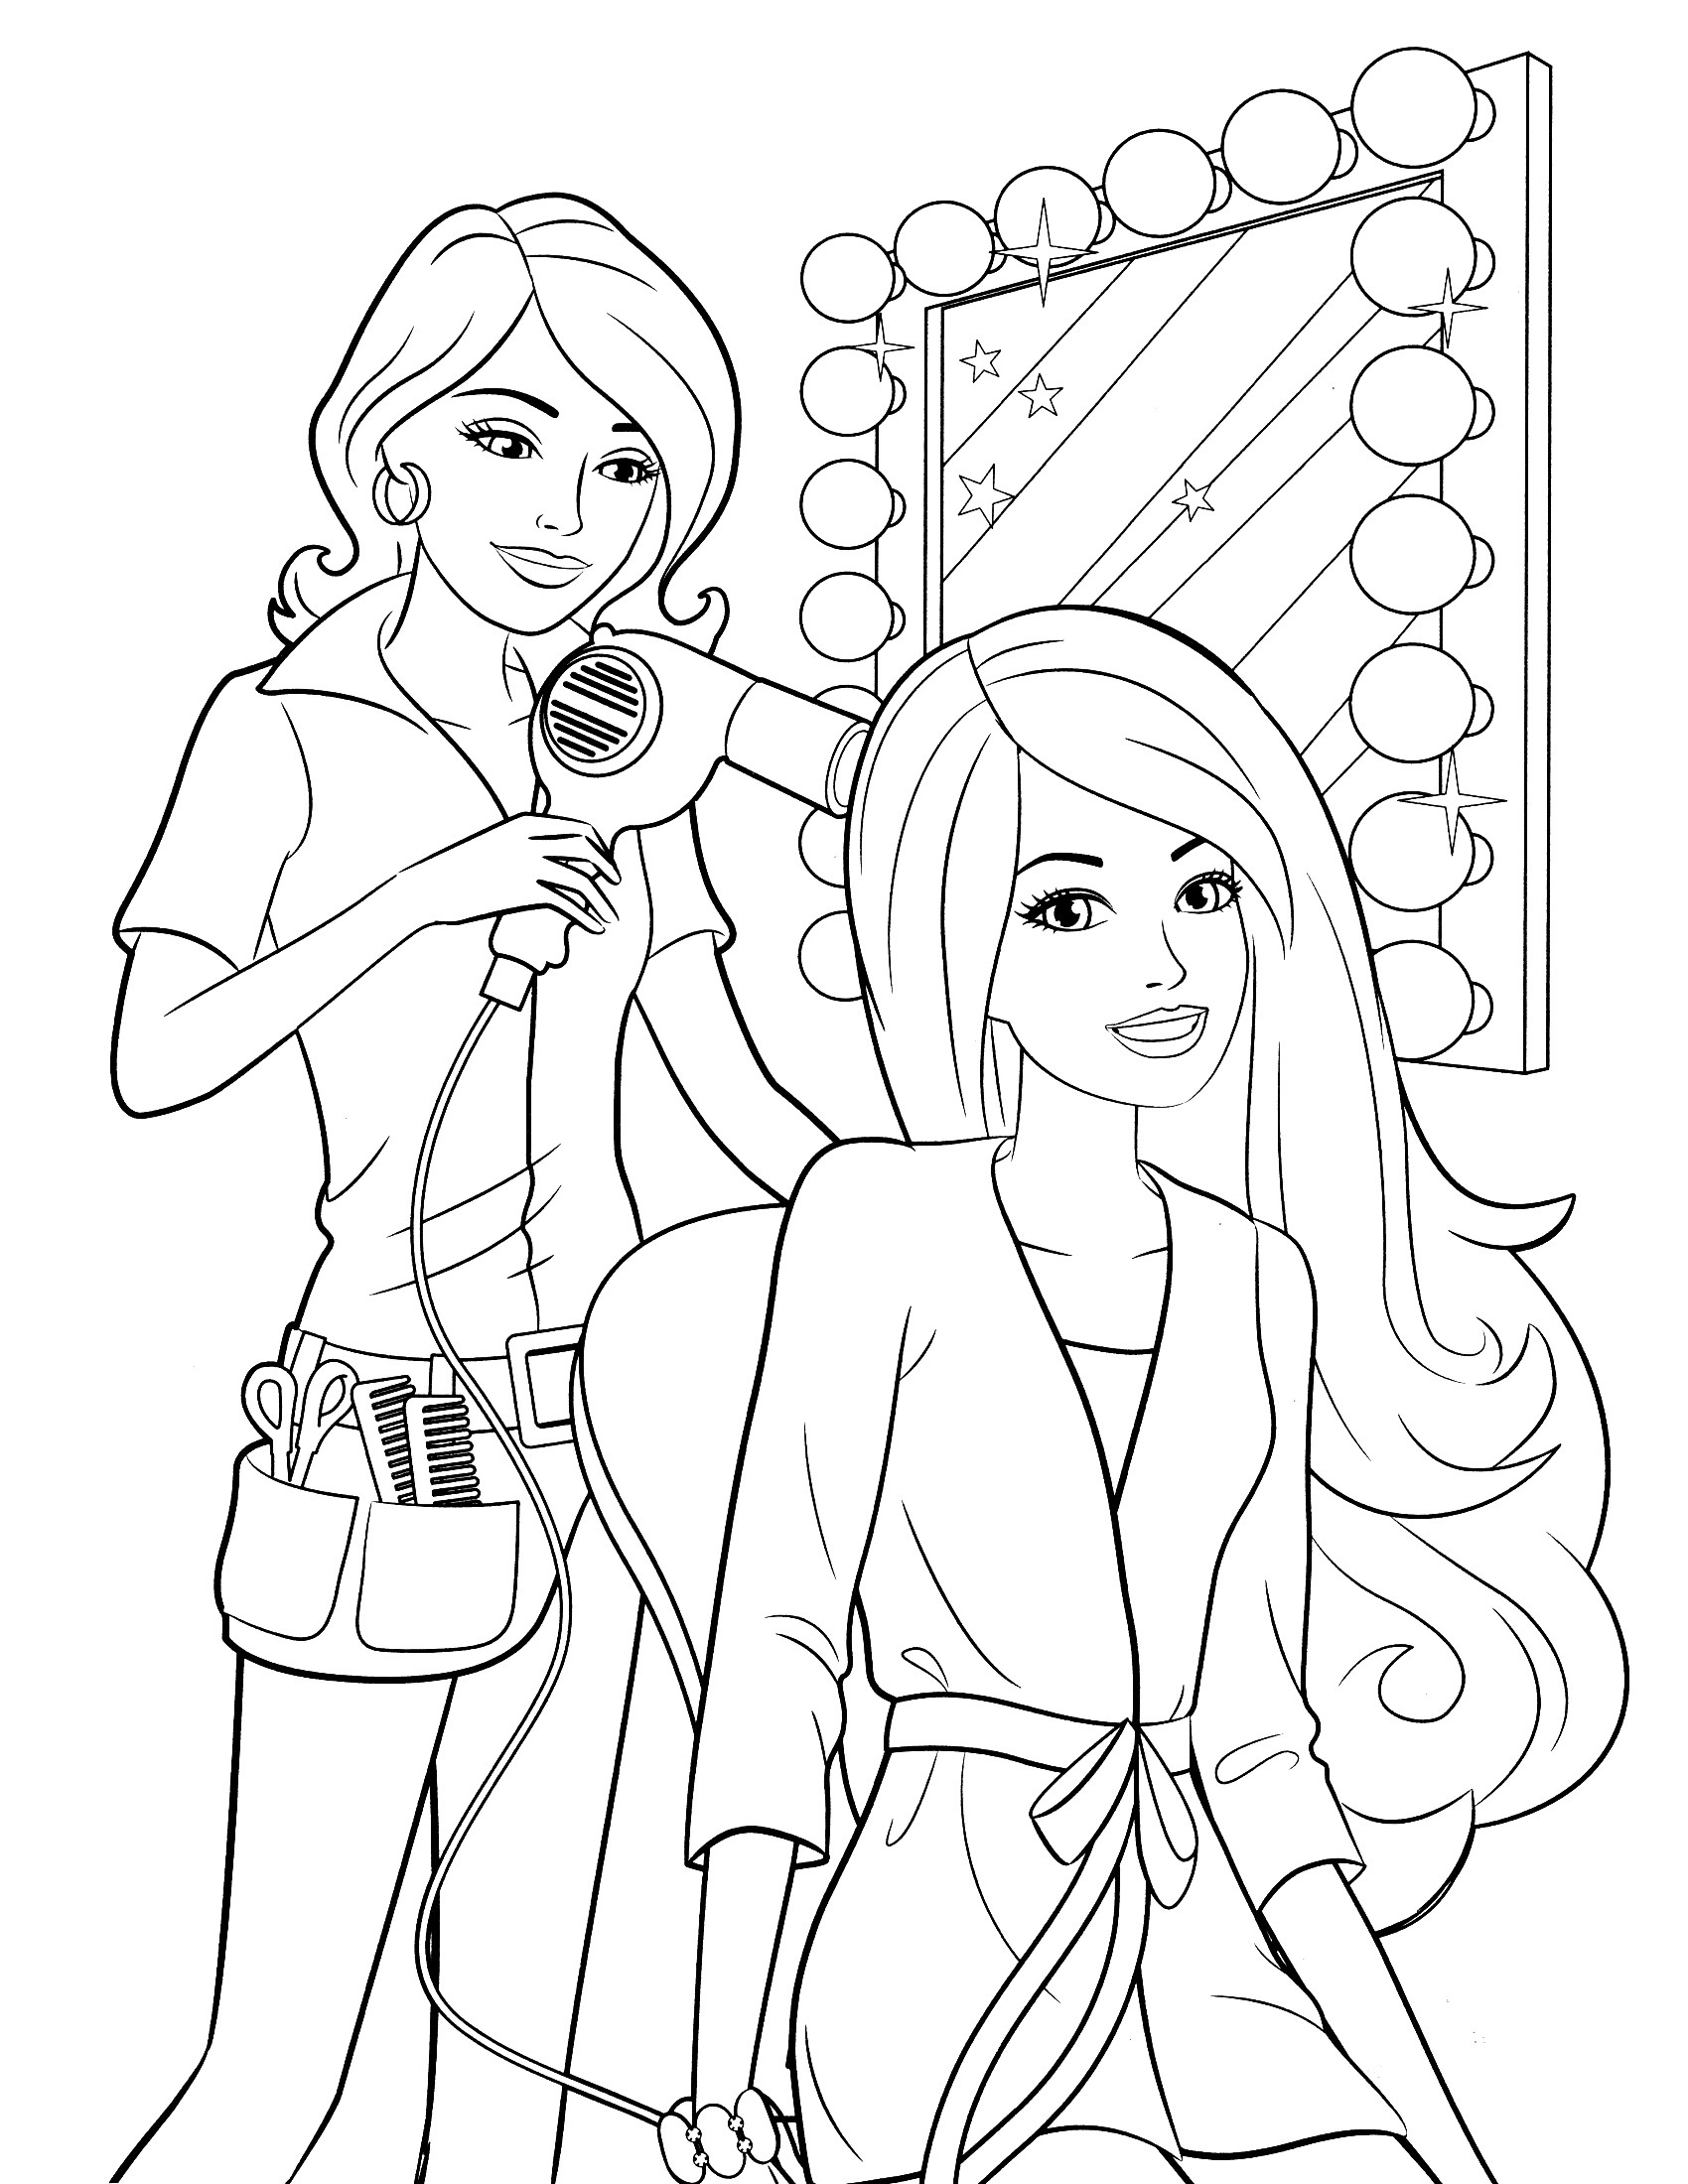 Coloring Sheets For Girls To Prin
 barbie coloring pages for girls